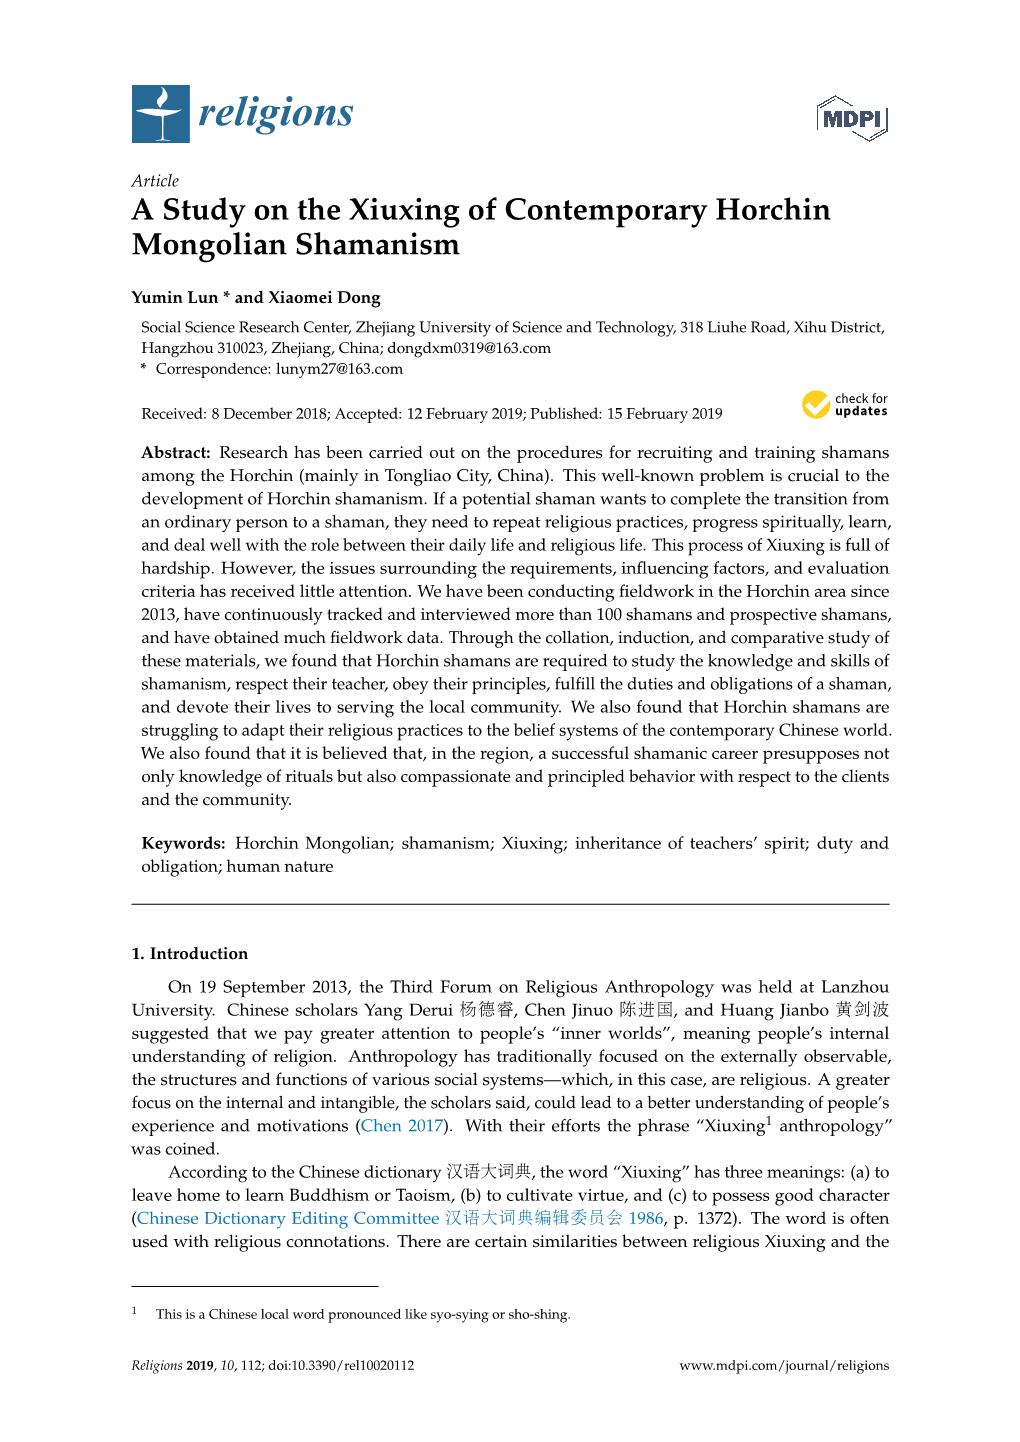 A Study on the Xiuxing of Contemporary Horchin Mongolian Shamanism